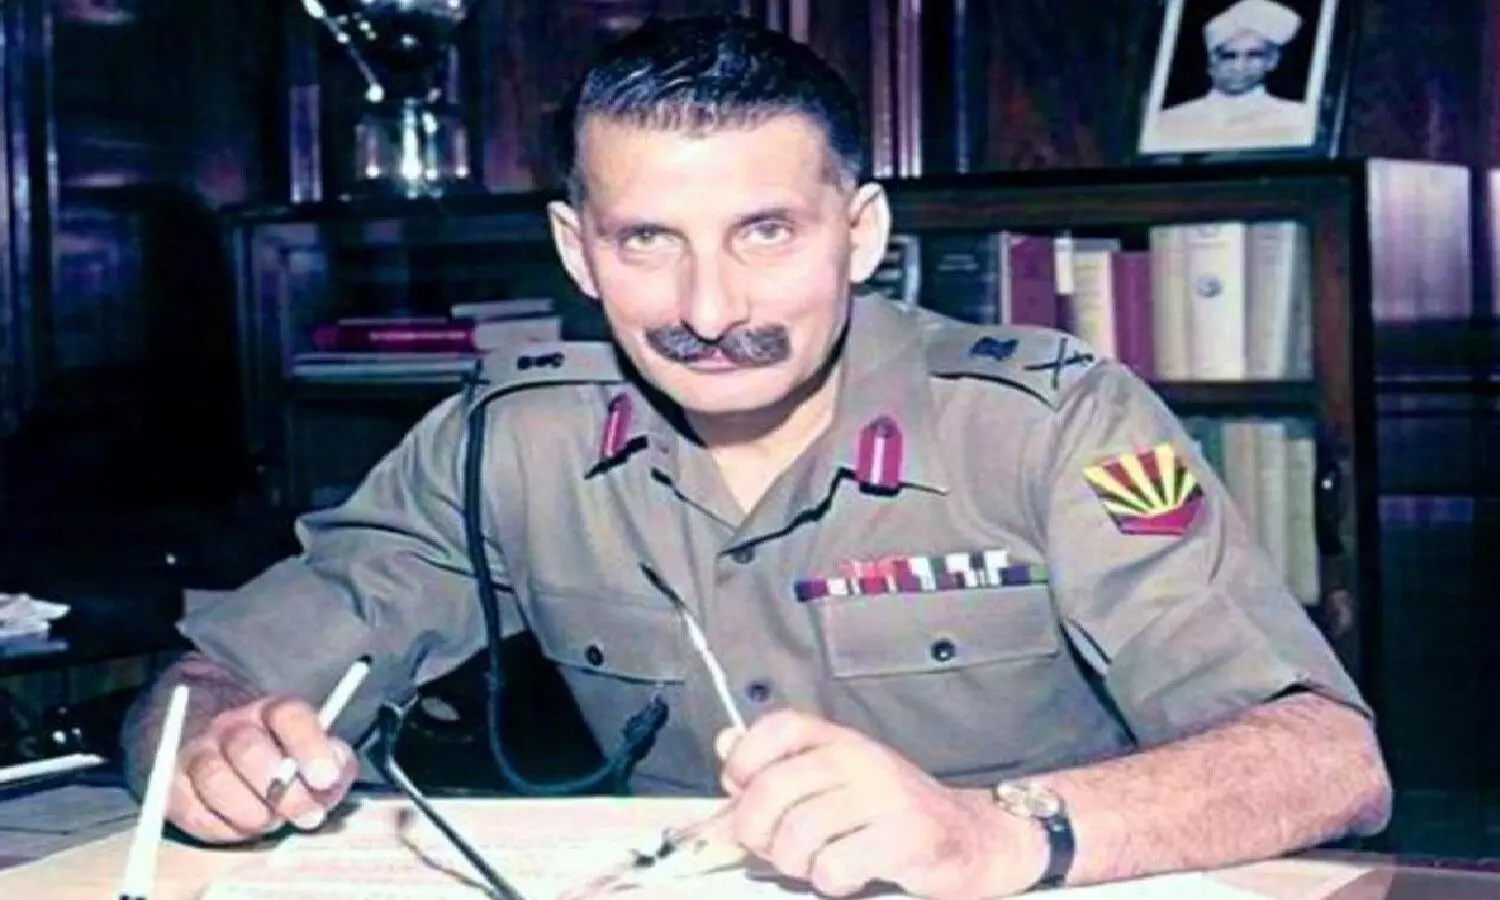 General Sam Manekshaw was the countrys first Field Marshal awarded the highest rank of this army in January 1973.